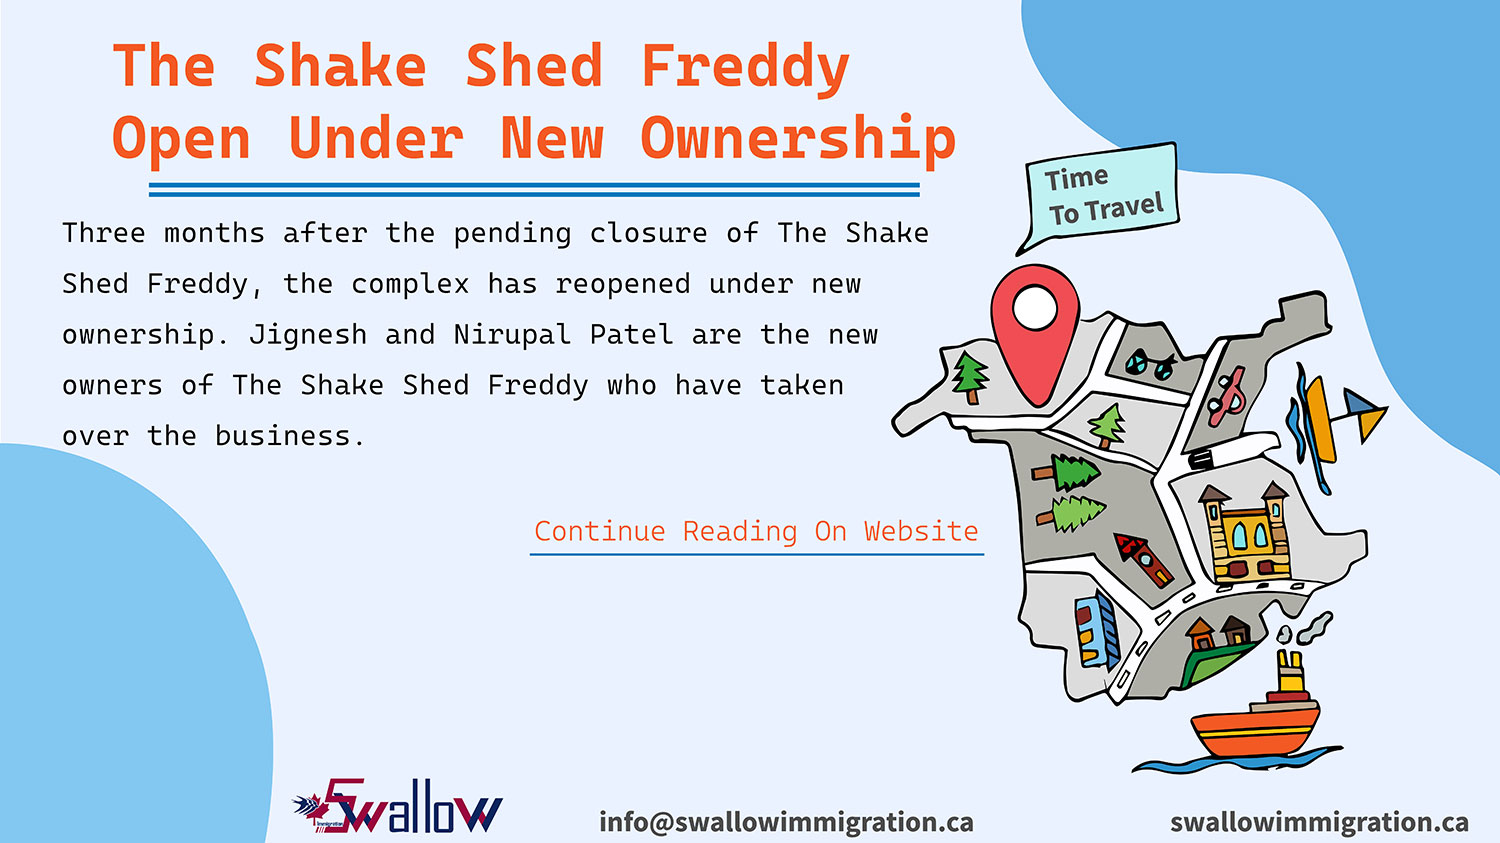 The Shake Shed Freddy Open Under New Ownership